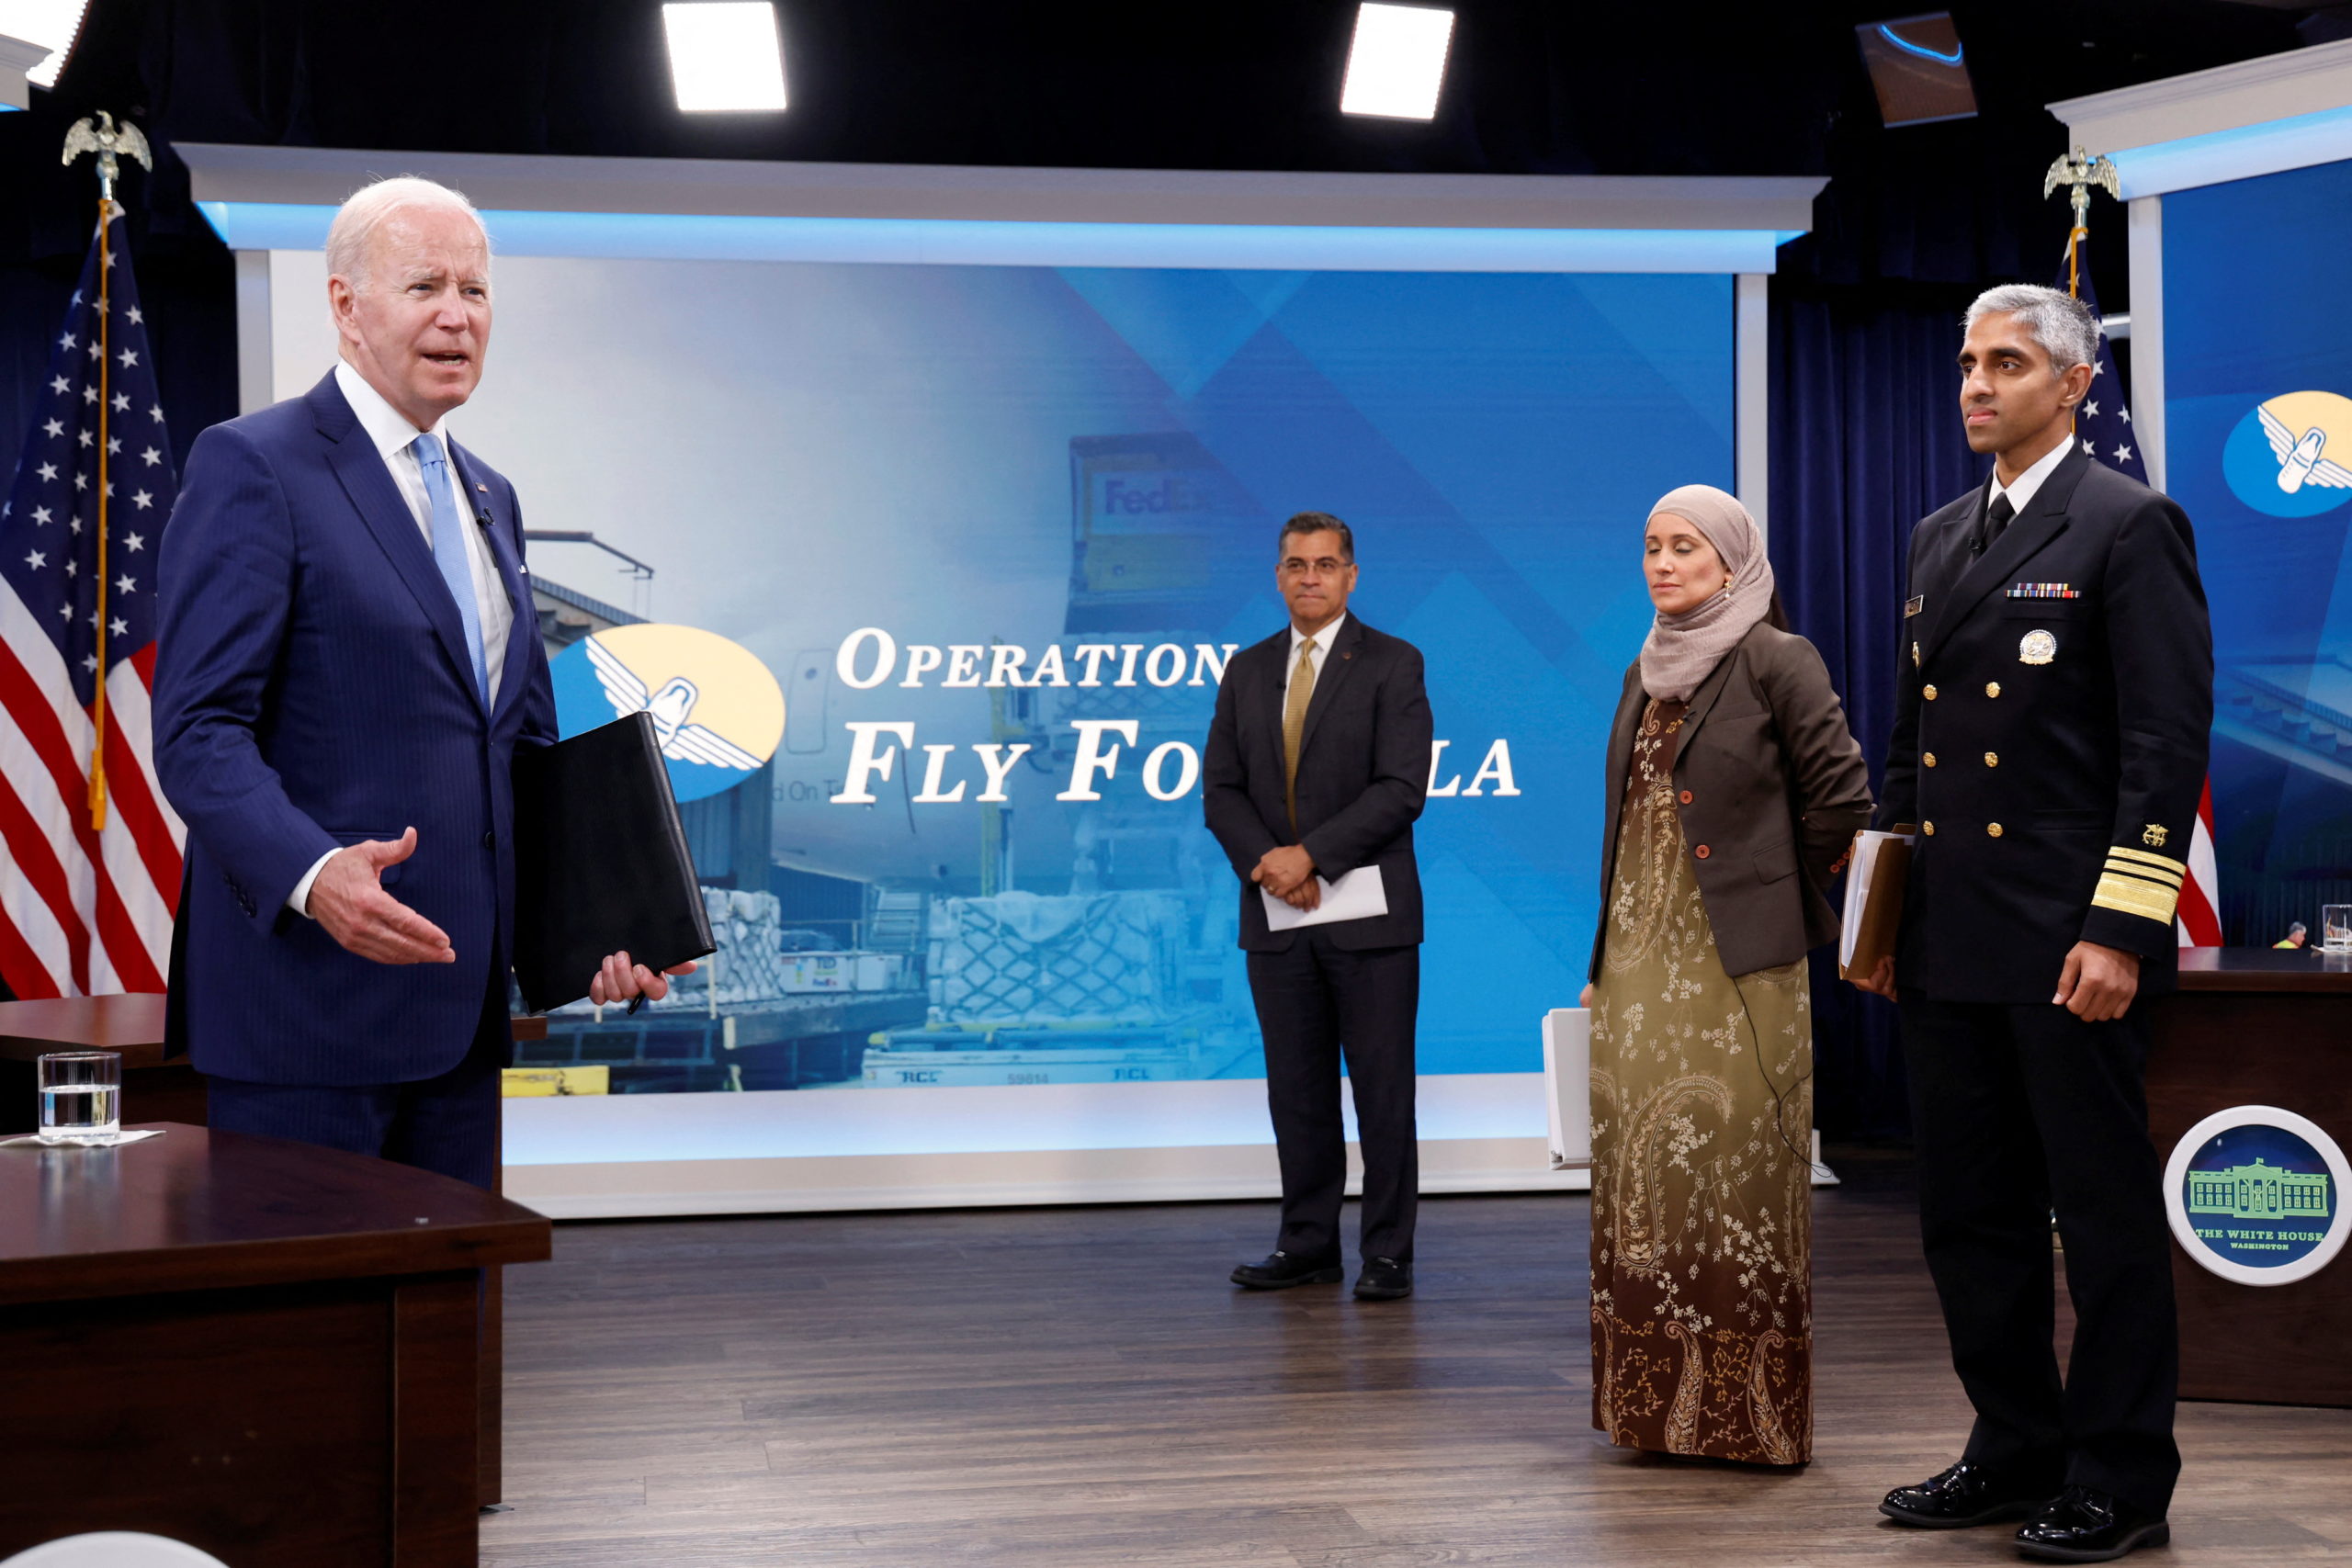 U.S. President Joe Biden, flanked by Secretary Xavier Becerra from U.S. Department of Health and Human Services, Surgeon General Vivek Murthy and Sameera Fazili, Deputy Assistant to the President and Deputy Director of the National Economic Council, speaks to journalists following holding a meeting with White House officials and baby formula manufacturers, as part of the U.S. response to the ongoing baby formula shortage, in an auditorium on the White House campus in Washington, U.S. June 1, 2022. REUTERS/Jonathan Ernst